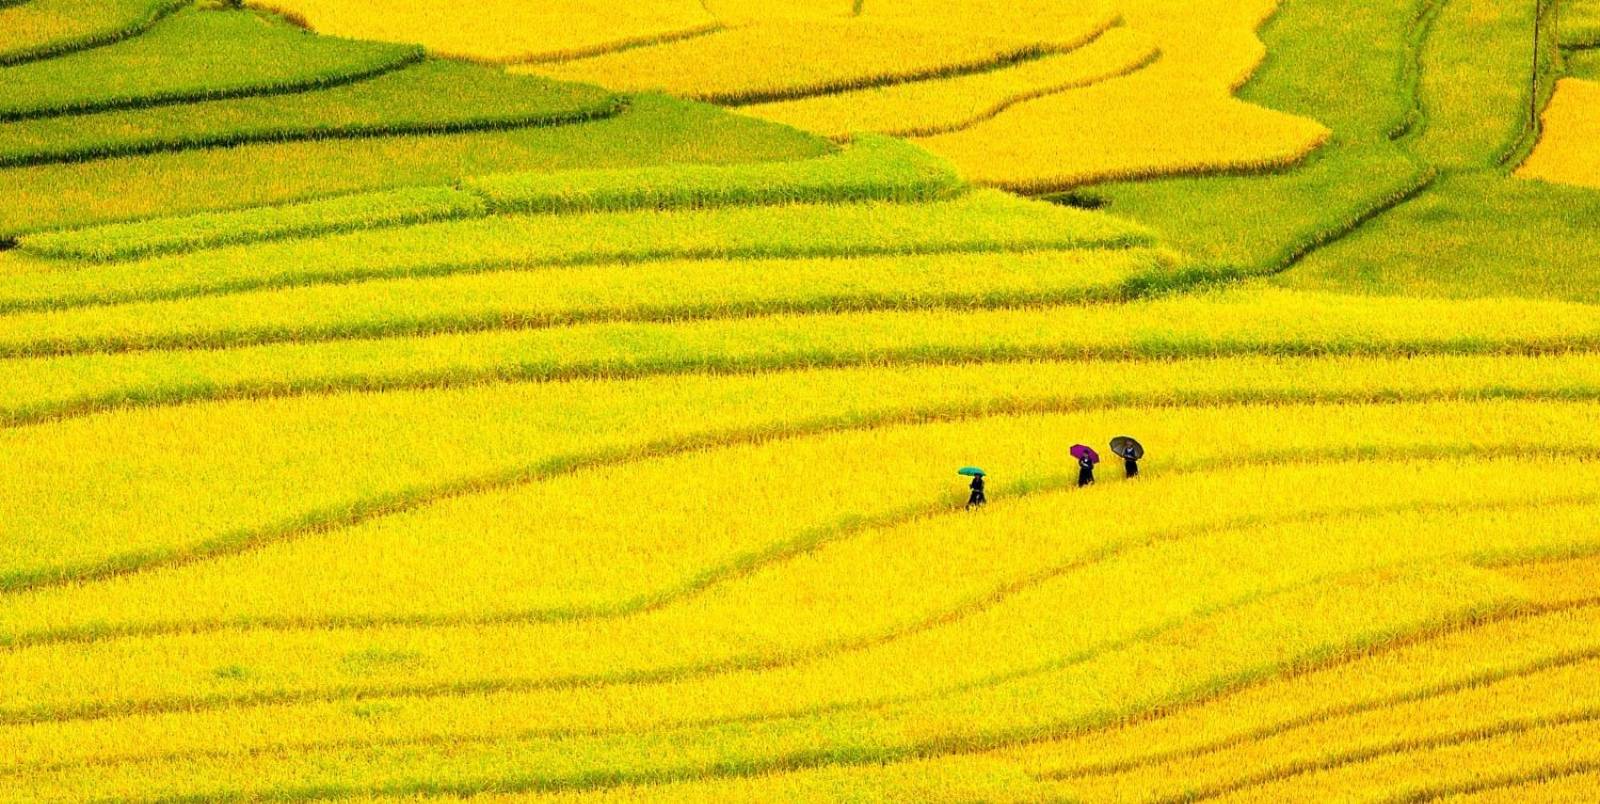 4 Best Places to See Golden Rice Fields in Vietnam